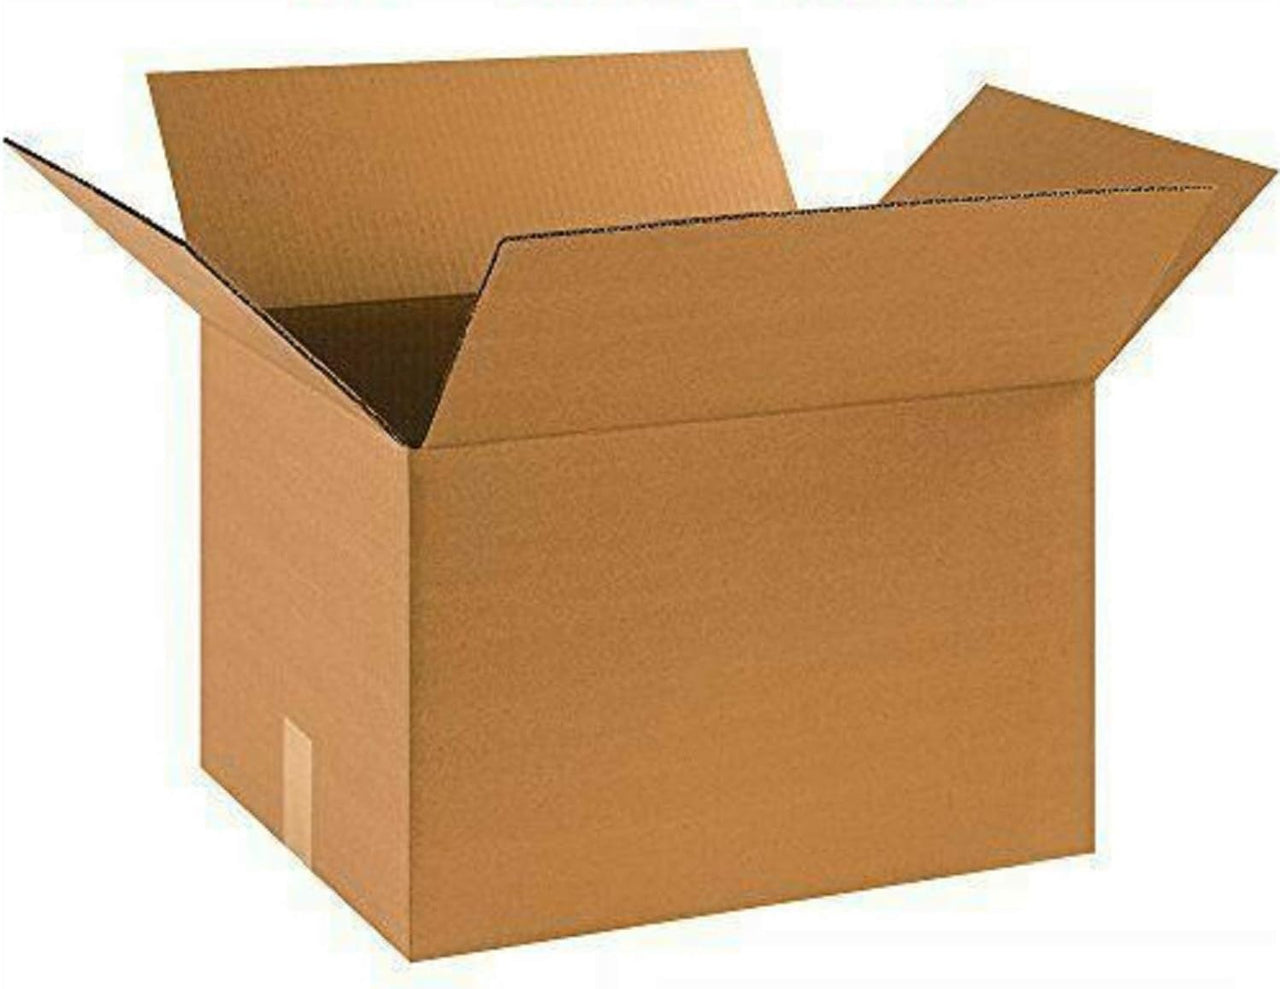 Shipping Boxes 14"L x 14"W x 14"H 25-Pack Corrugated Cardboard Box for Packing Moving Storage